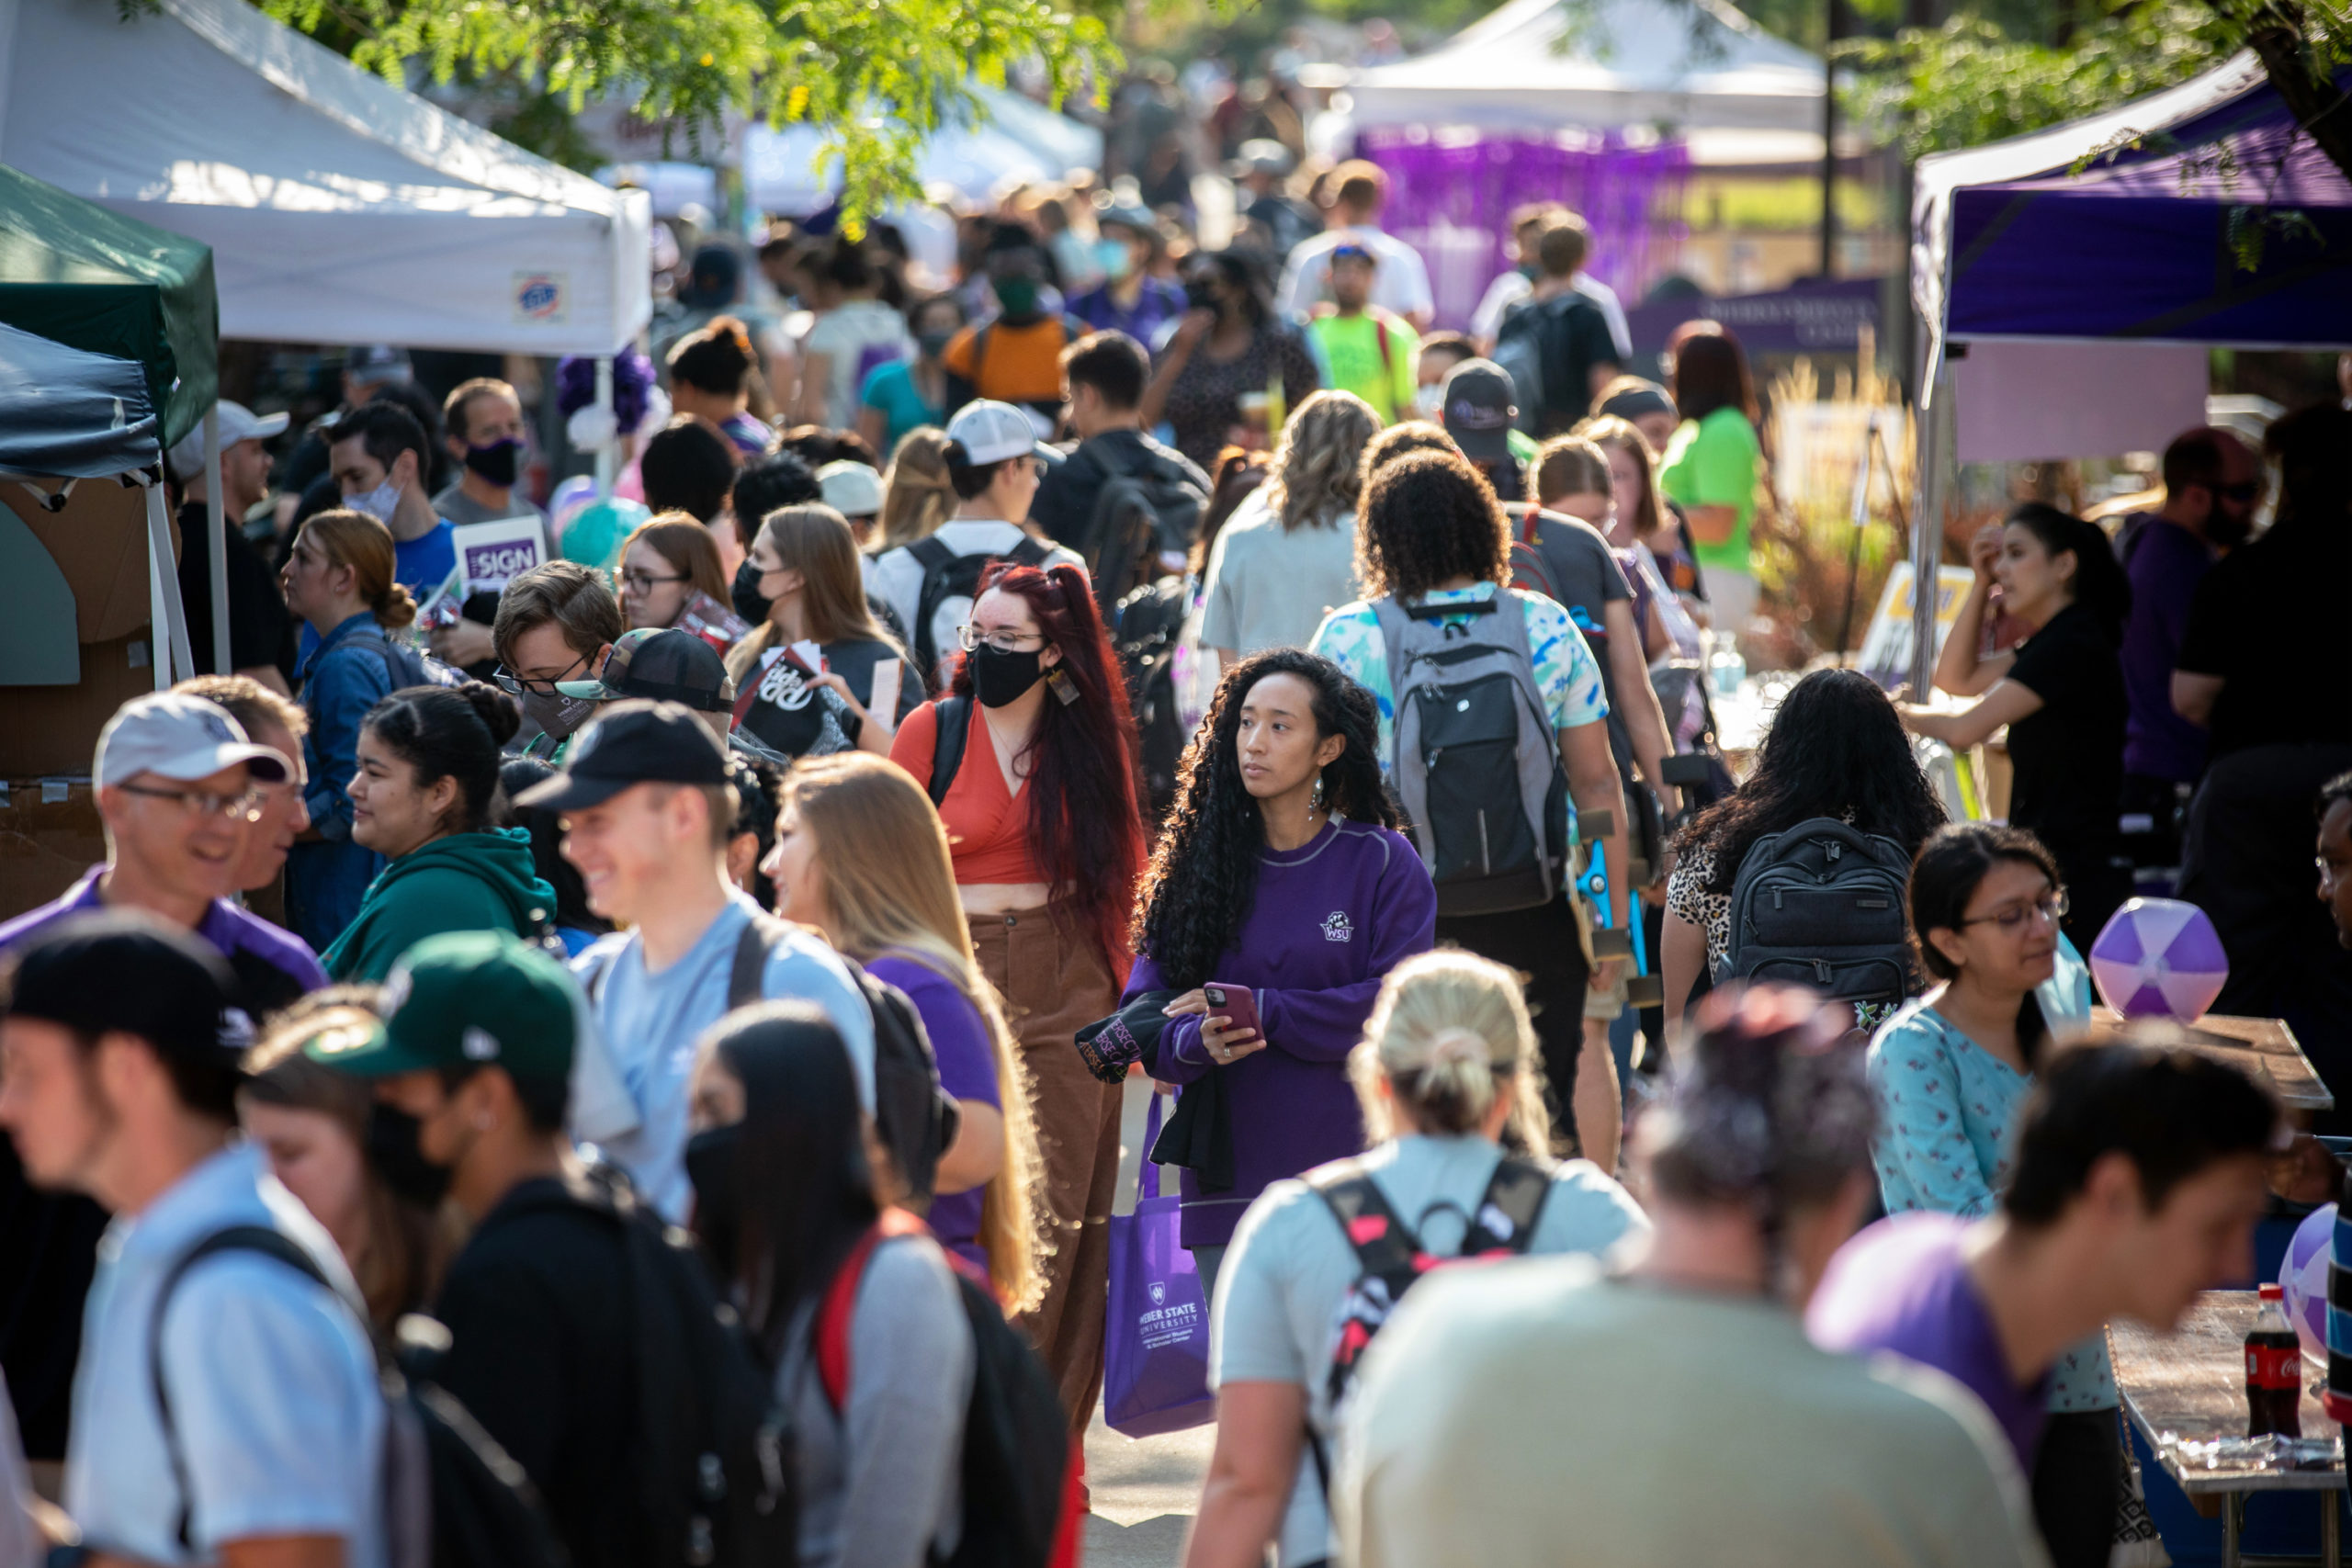 Weber State University students and community members attend the 2021 Block Party on Sept. 3, 2021.